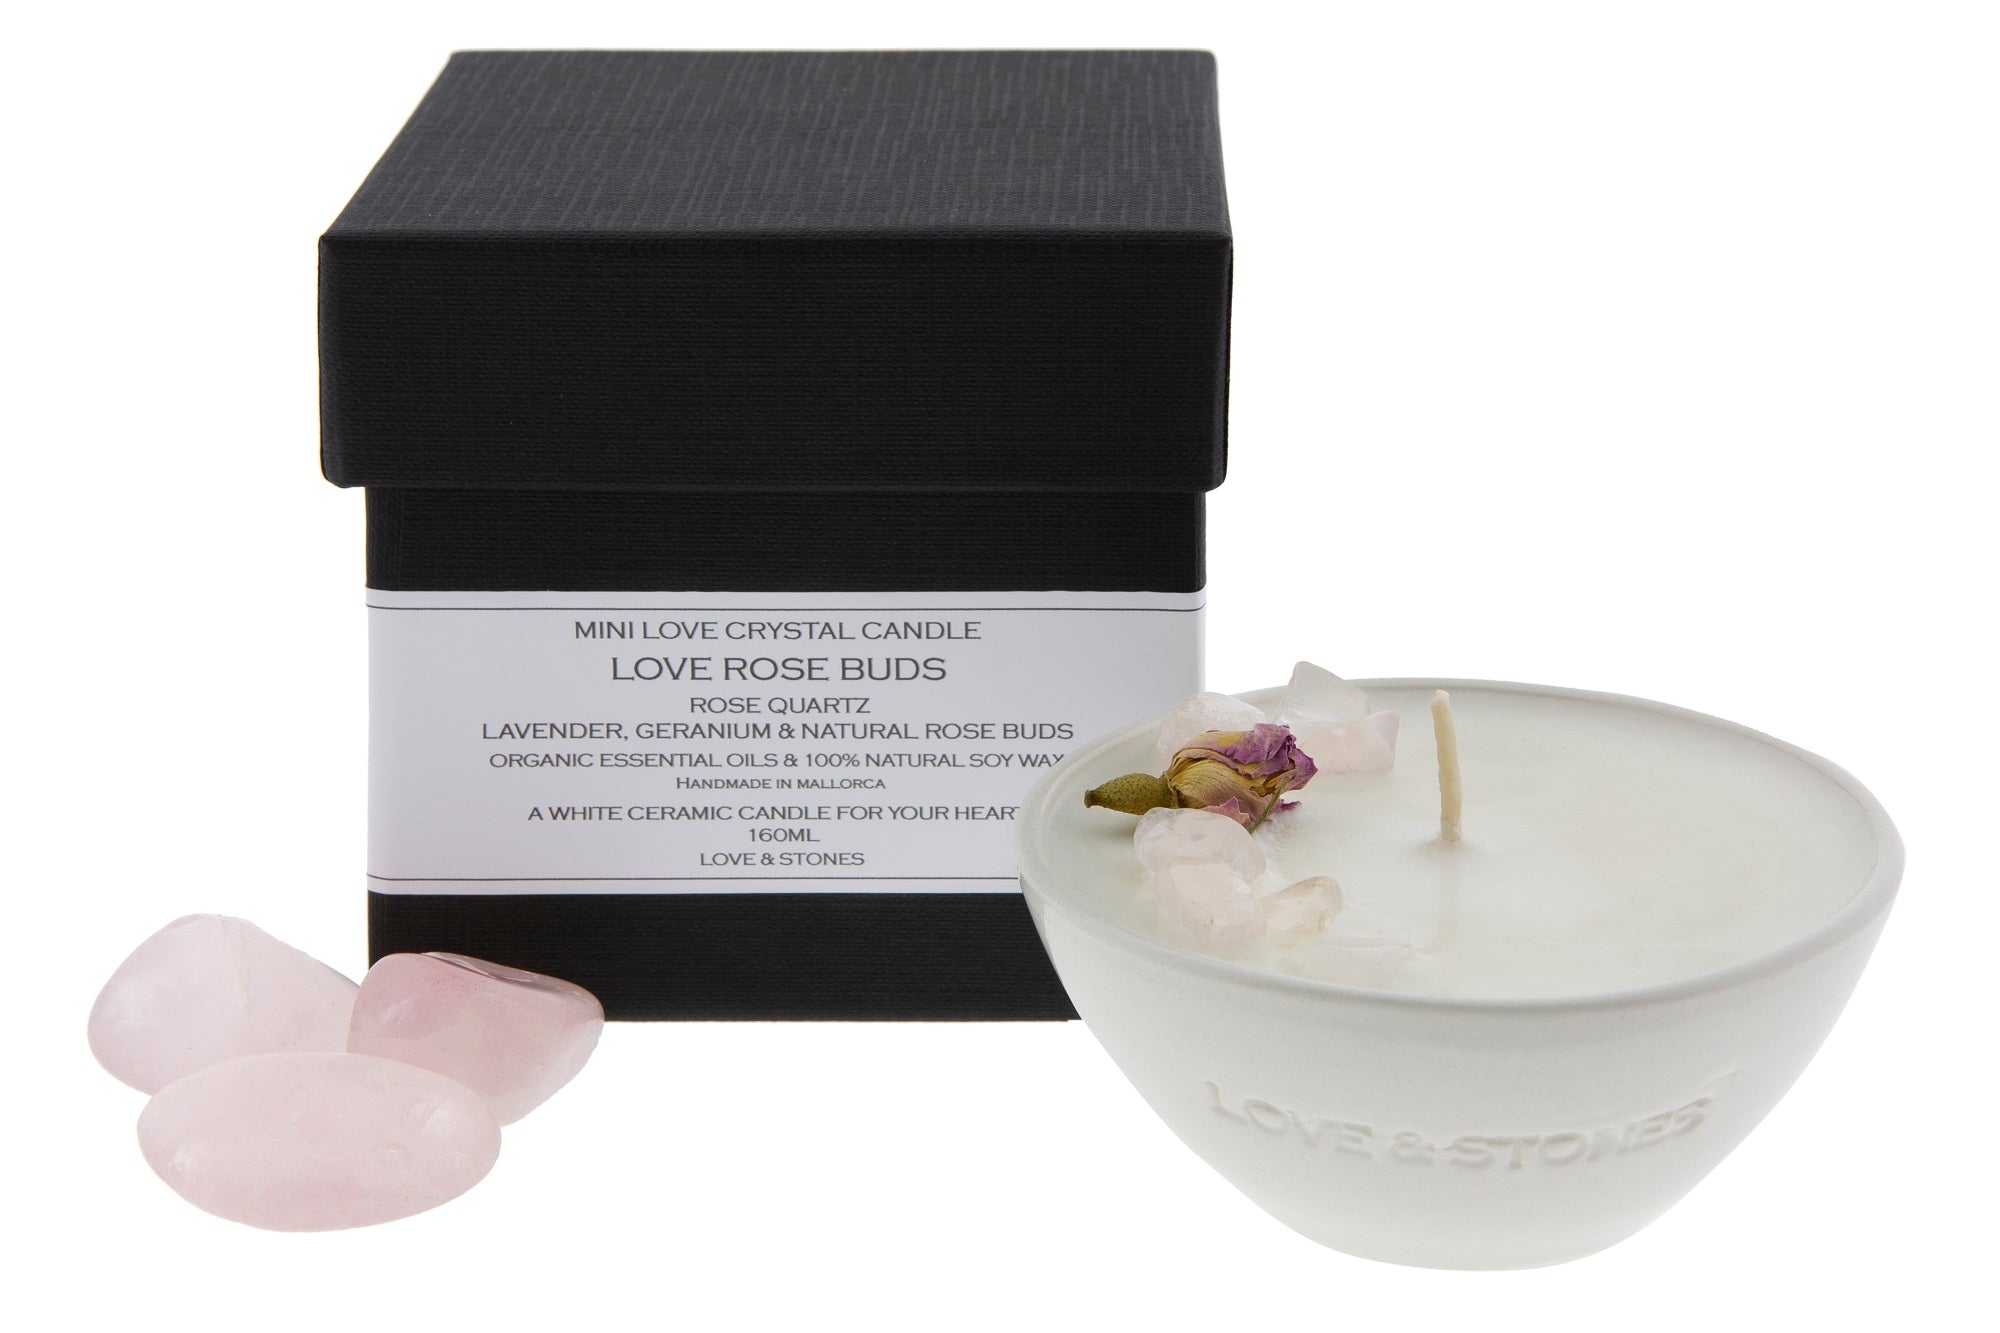 LOVE & STONES - Mini Love White Ceramic Rose Buds Crystal Candle 20165